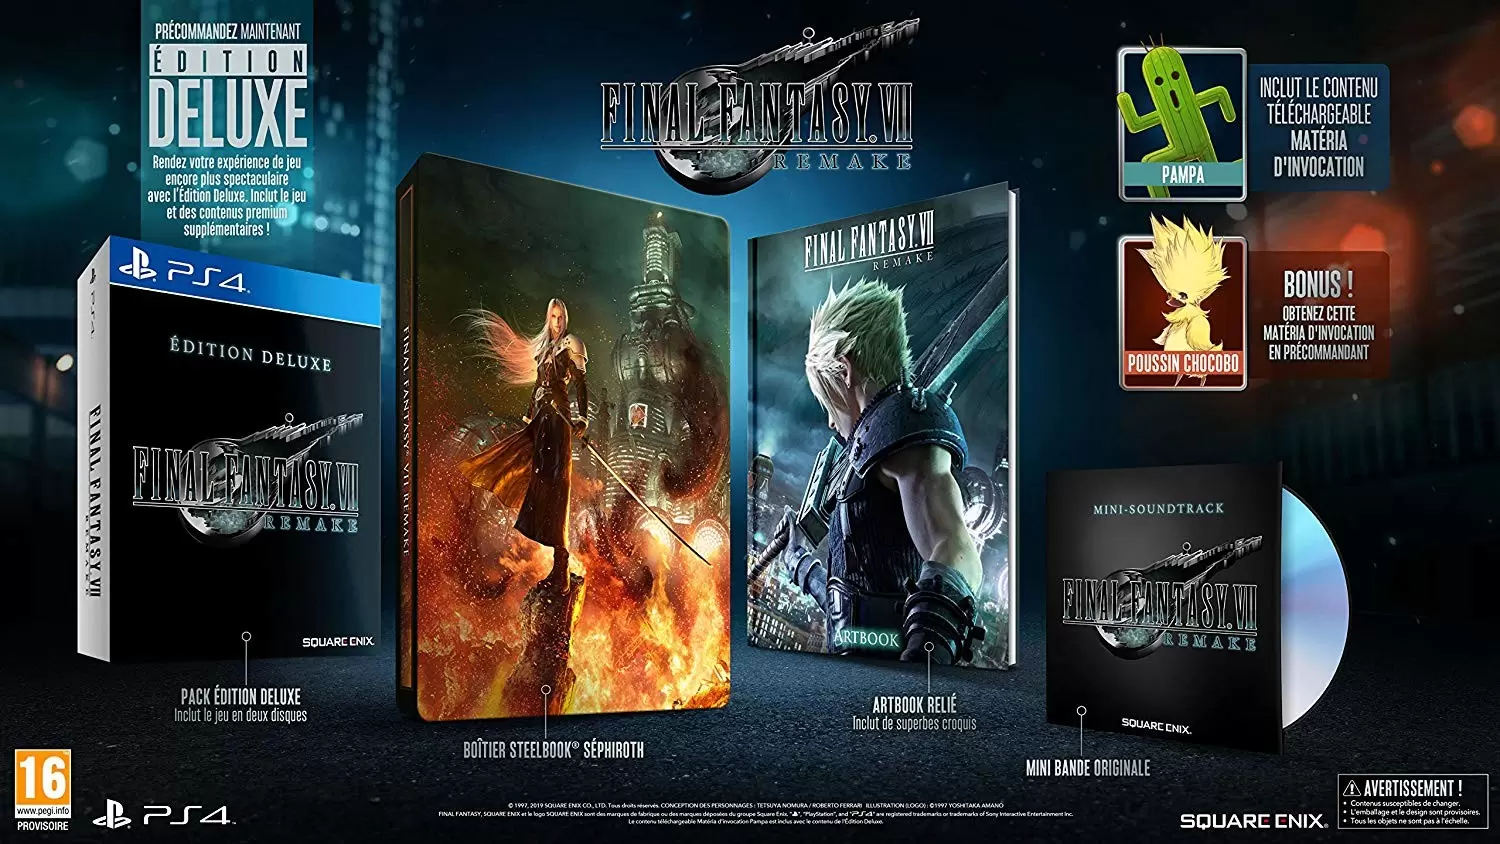 Jeux PS4 - Final Fantasy VII Remake Edition Deluxe